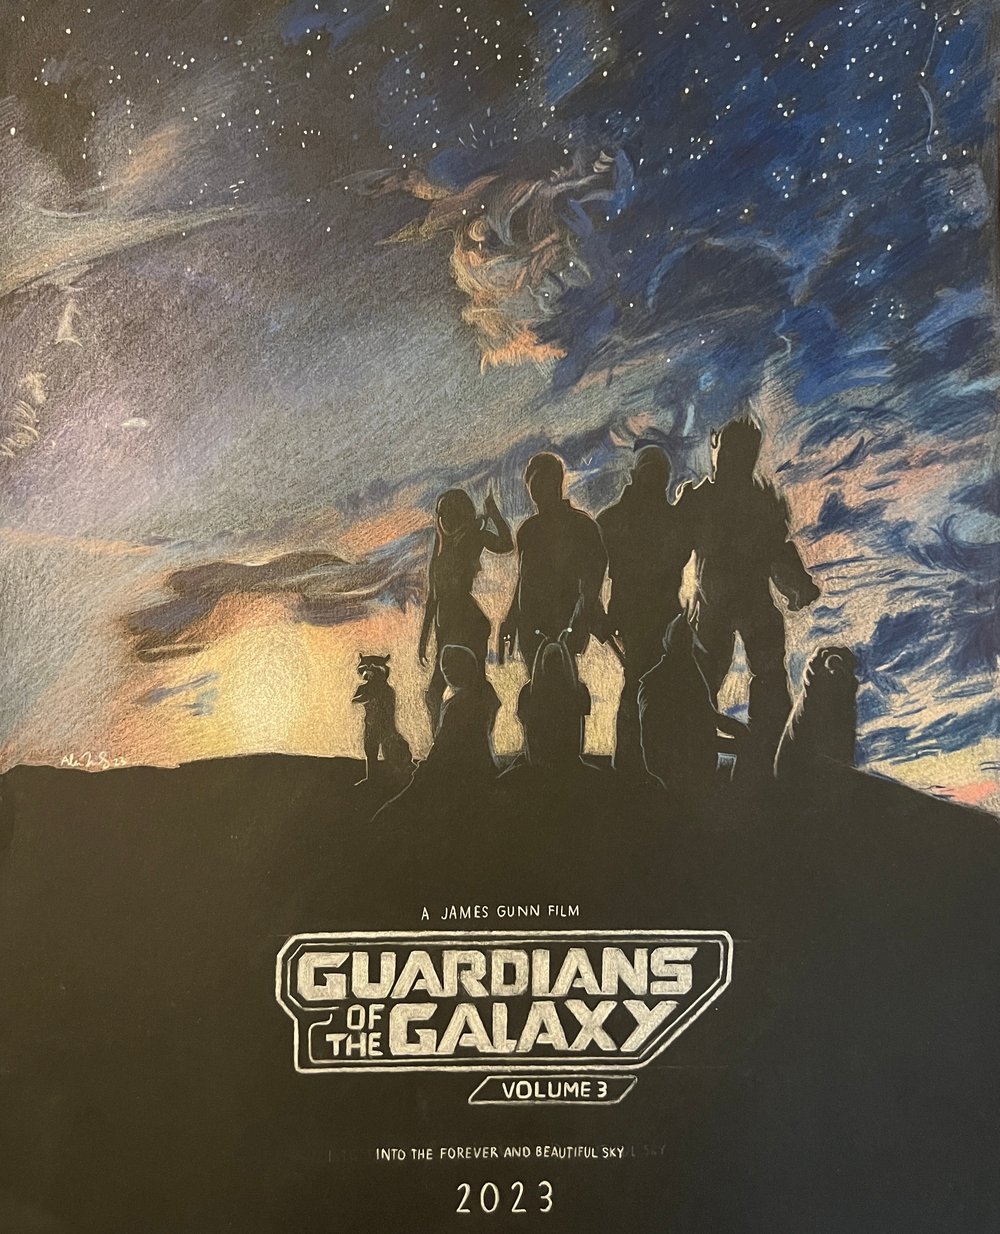 Image of “Into the forever and beautiful sky.” GUARDIANS OF THE GALAXY VOL. 3 Art Print